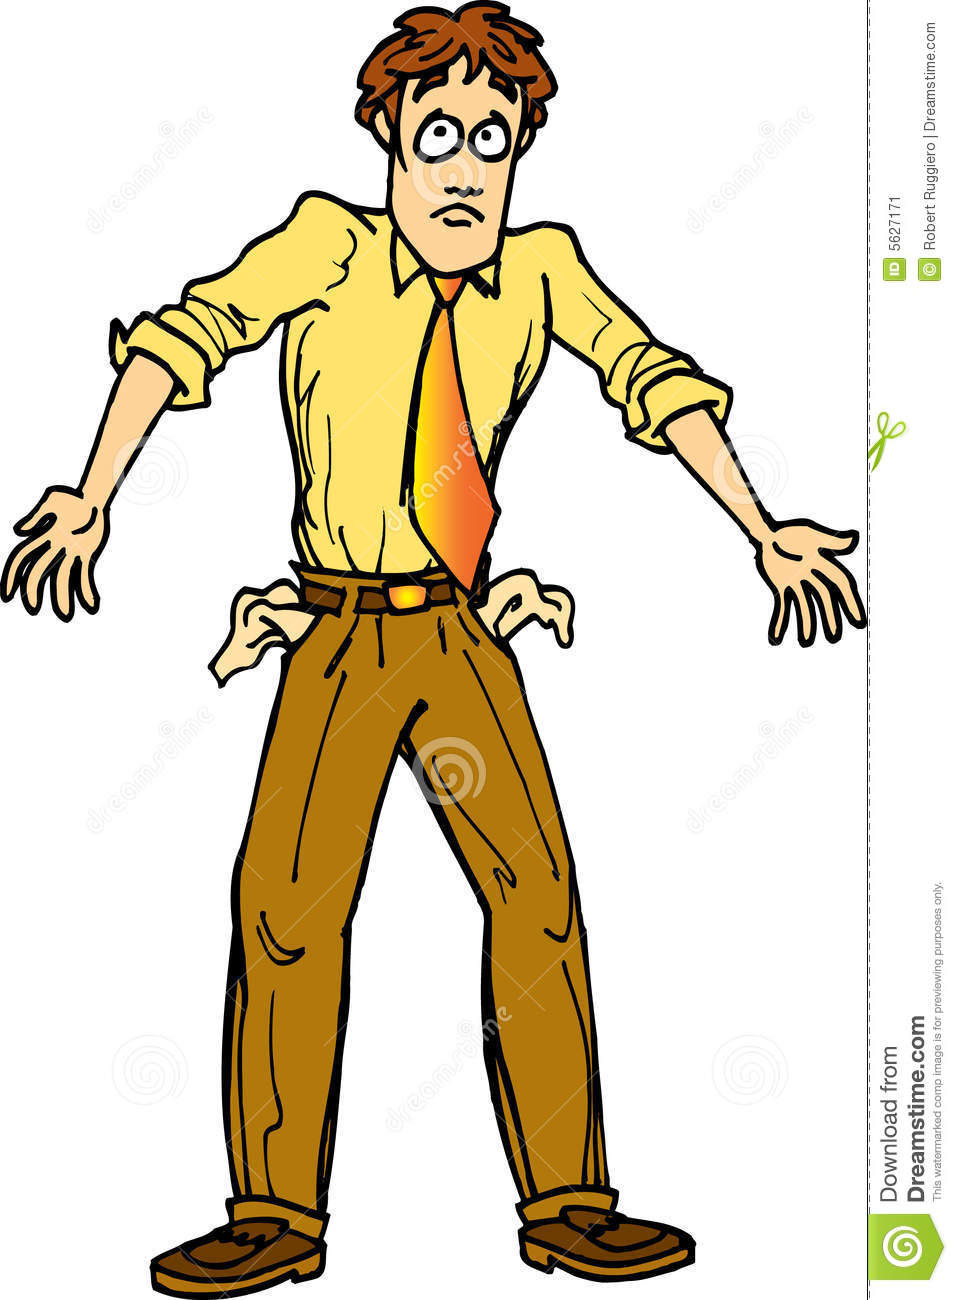 Poor People Clipart Poor Man With Pockets Out